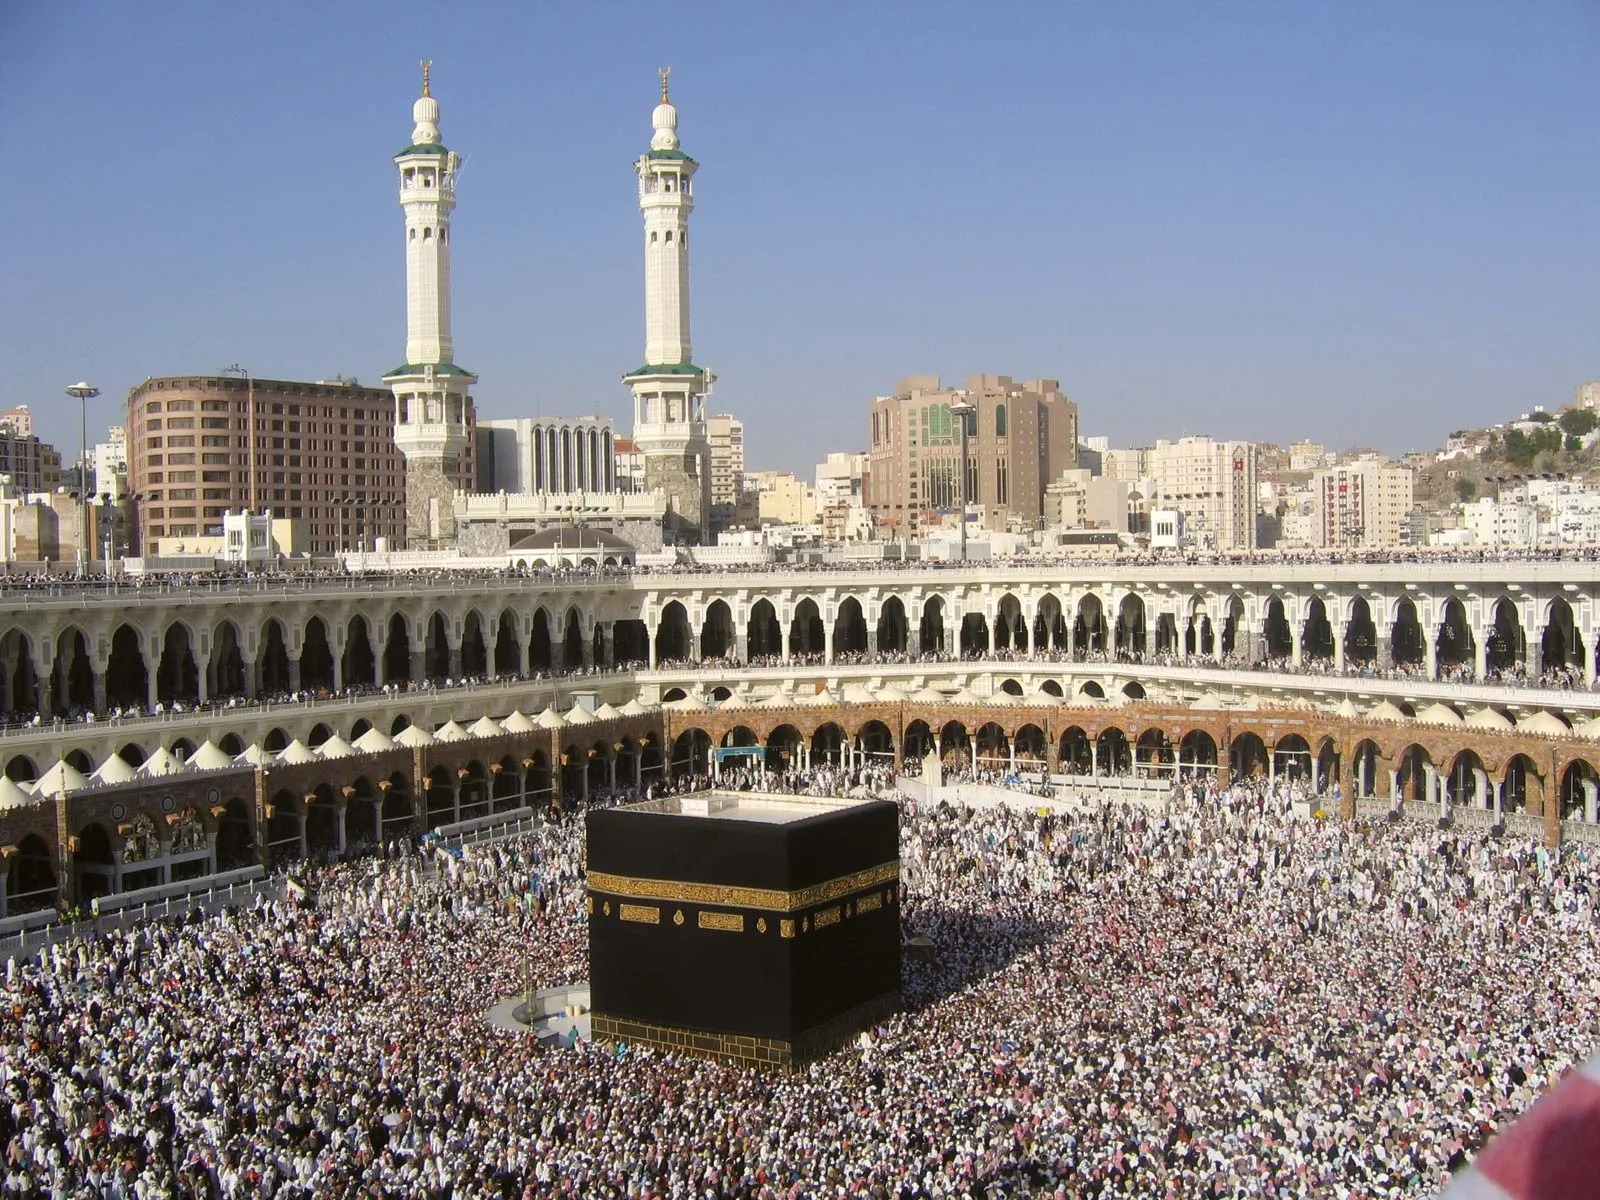 Can You Guess the Asian Country With Just Three Clues? Kaaba, Mecca pilgrimage, Saudi Arabia